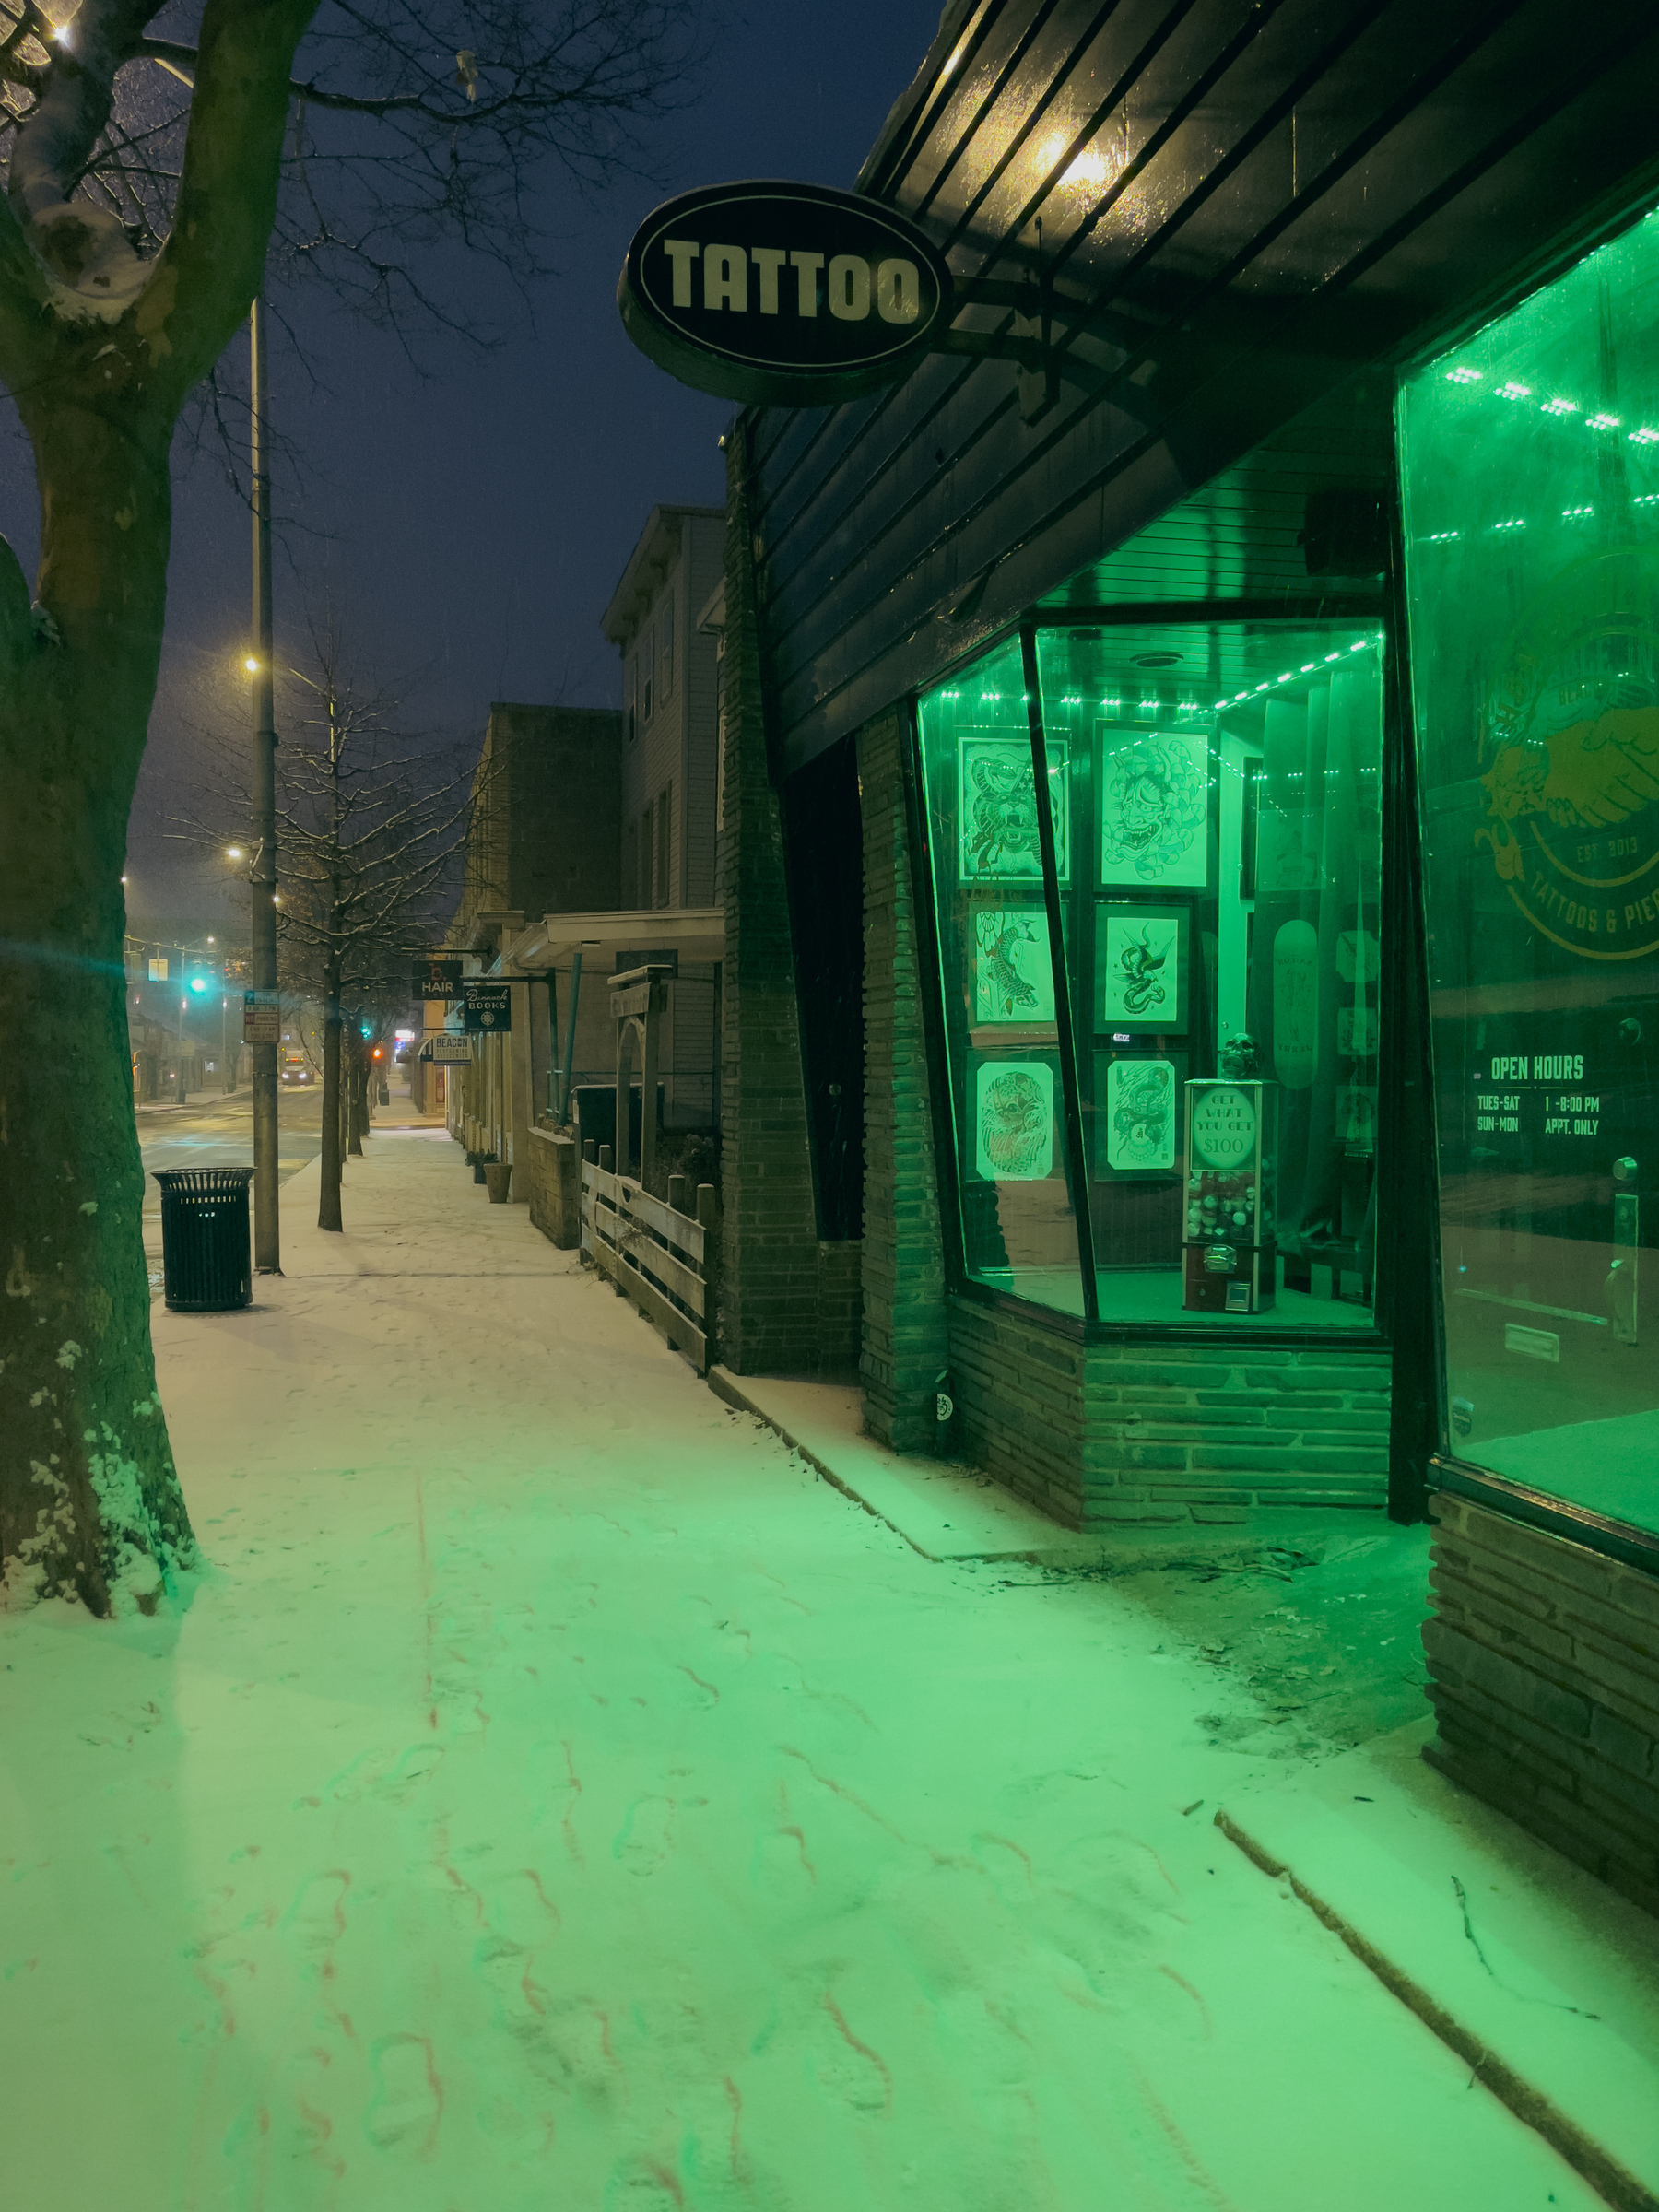 Streetscape looking down snow dusted sidewalk in front of a tattoo parlor storefront with green light from the parlor illuminating the scene.